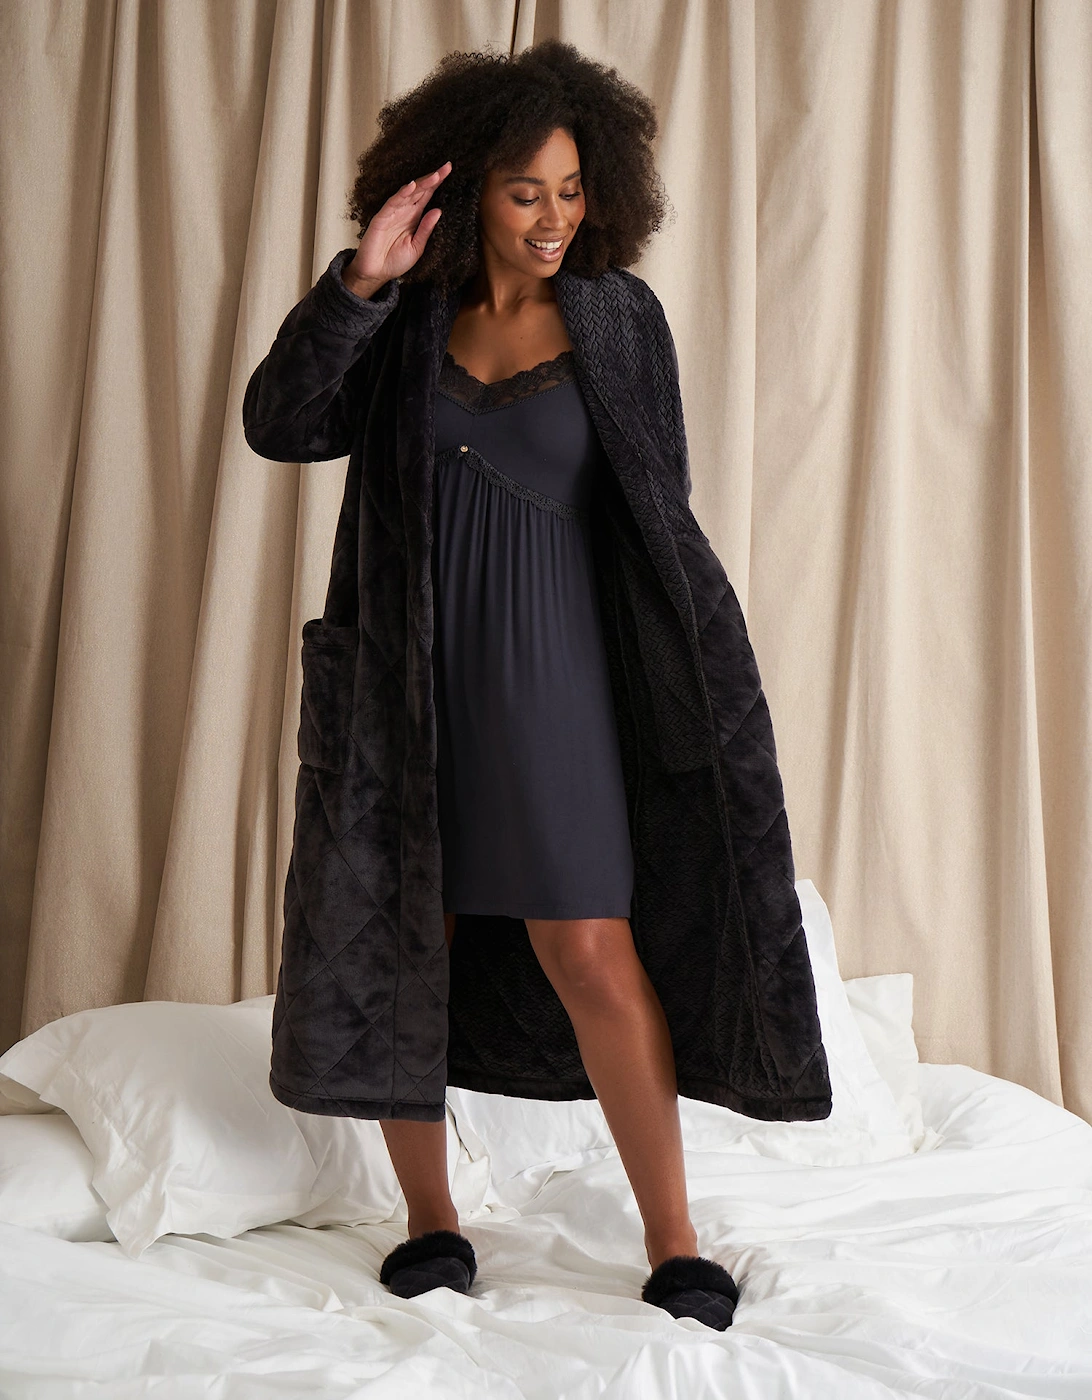 Quilted Velour Robe in Raven